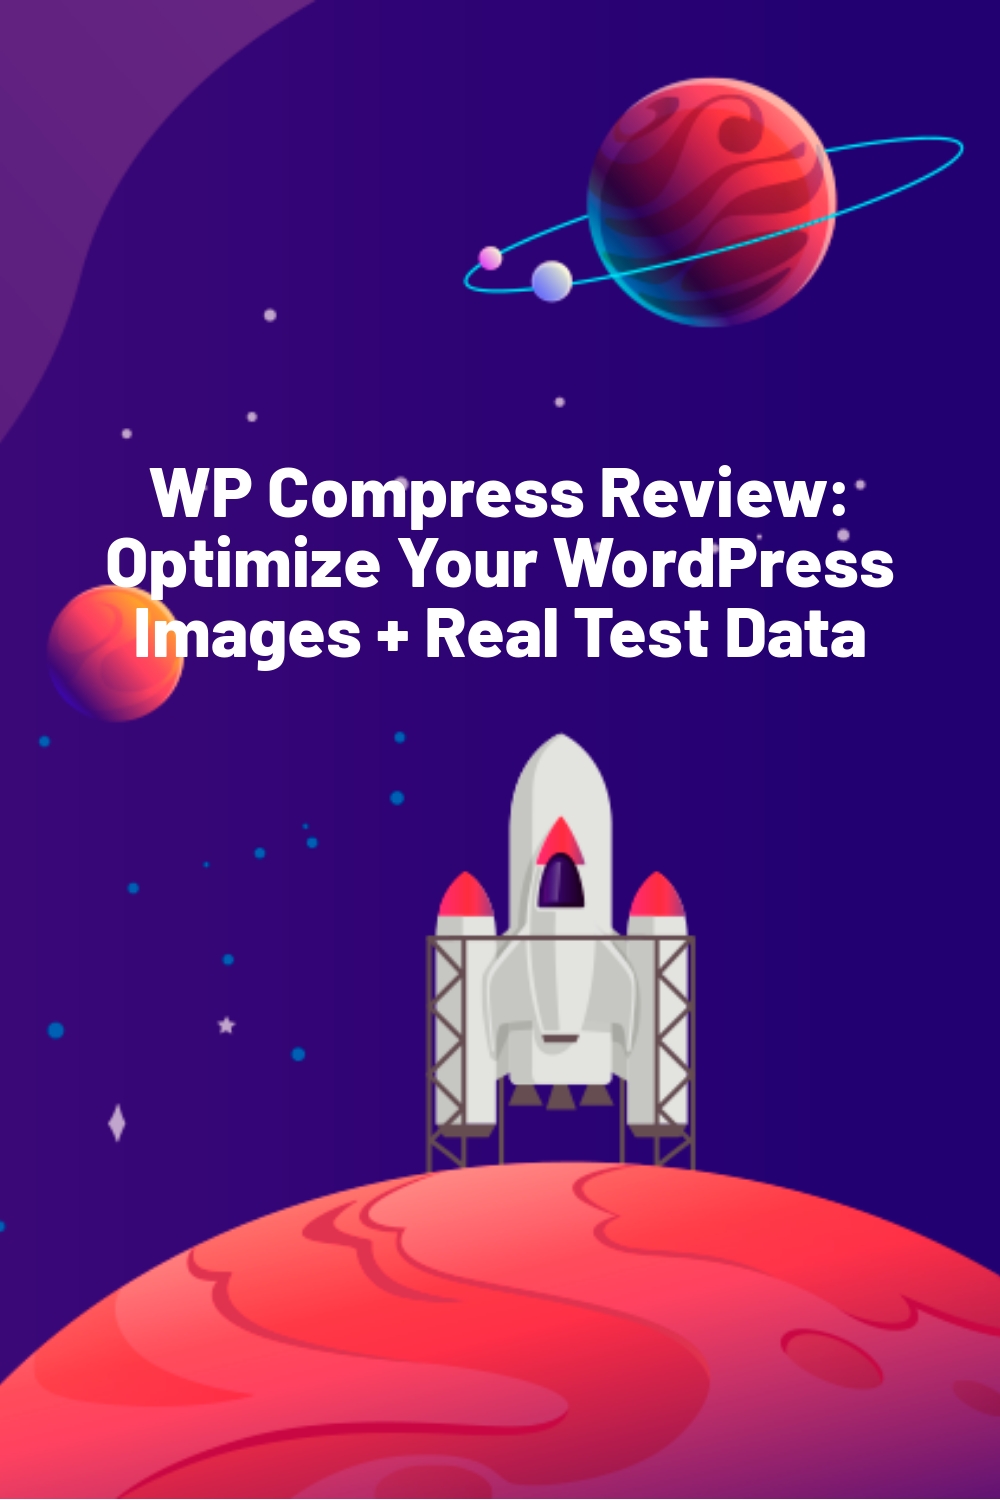 WP Compress Review: Optimize Your WordPress Images + Real Test Data